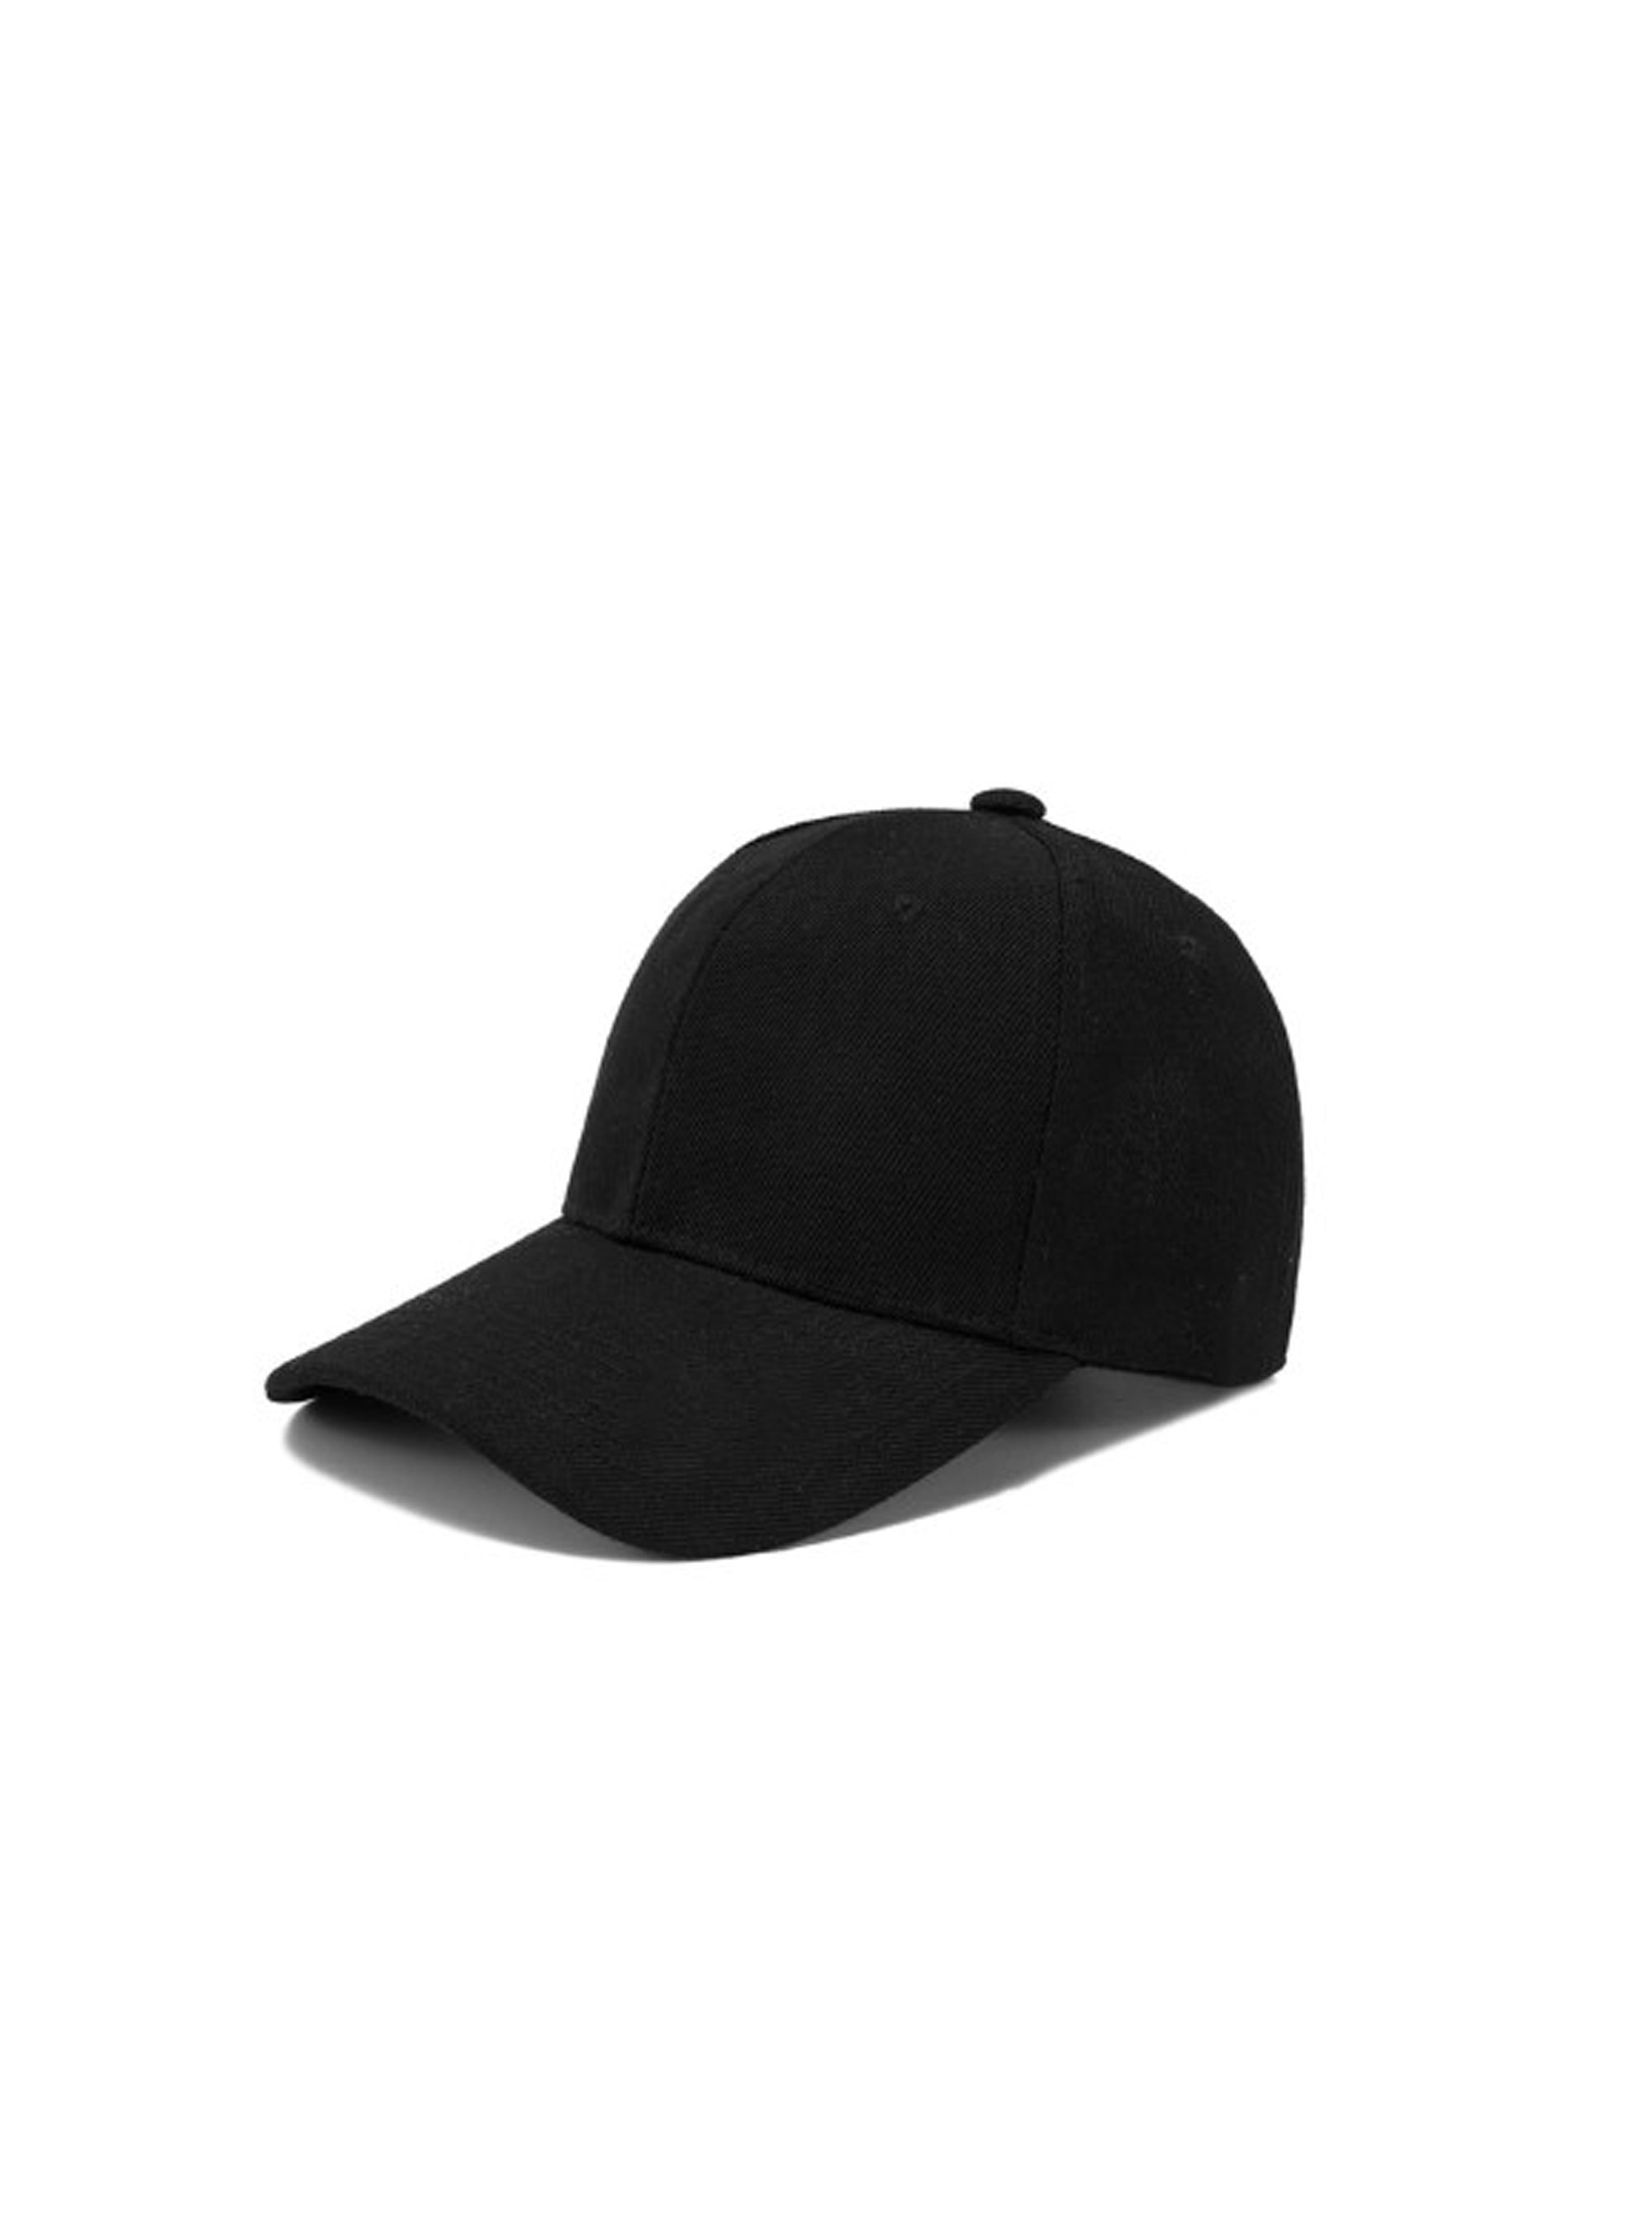 pitch black cap with adjustable strap